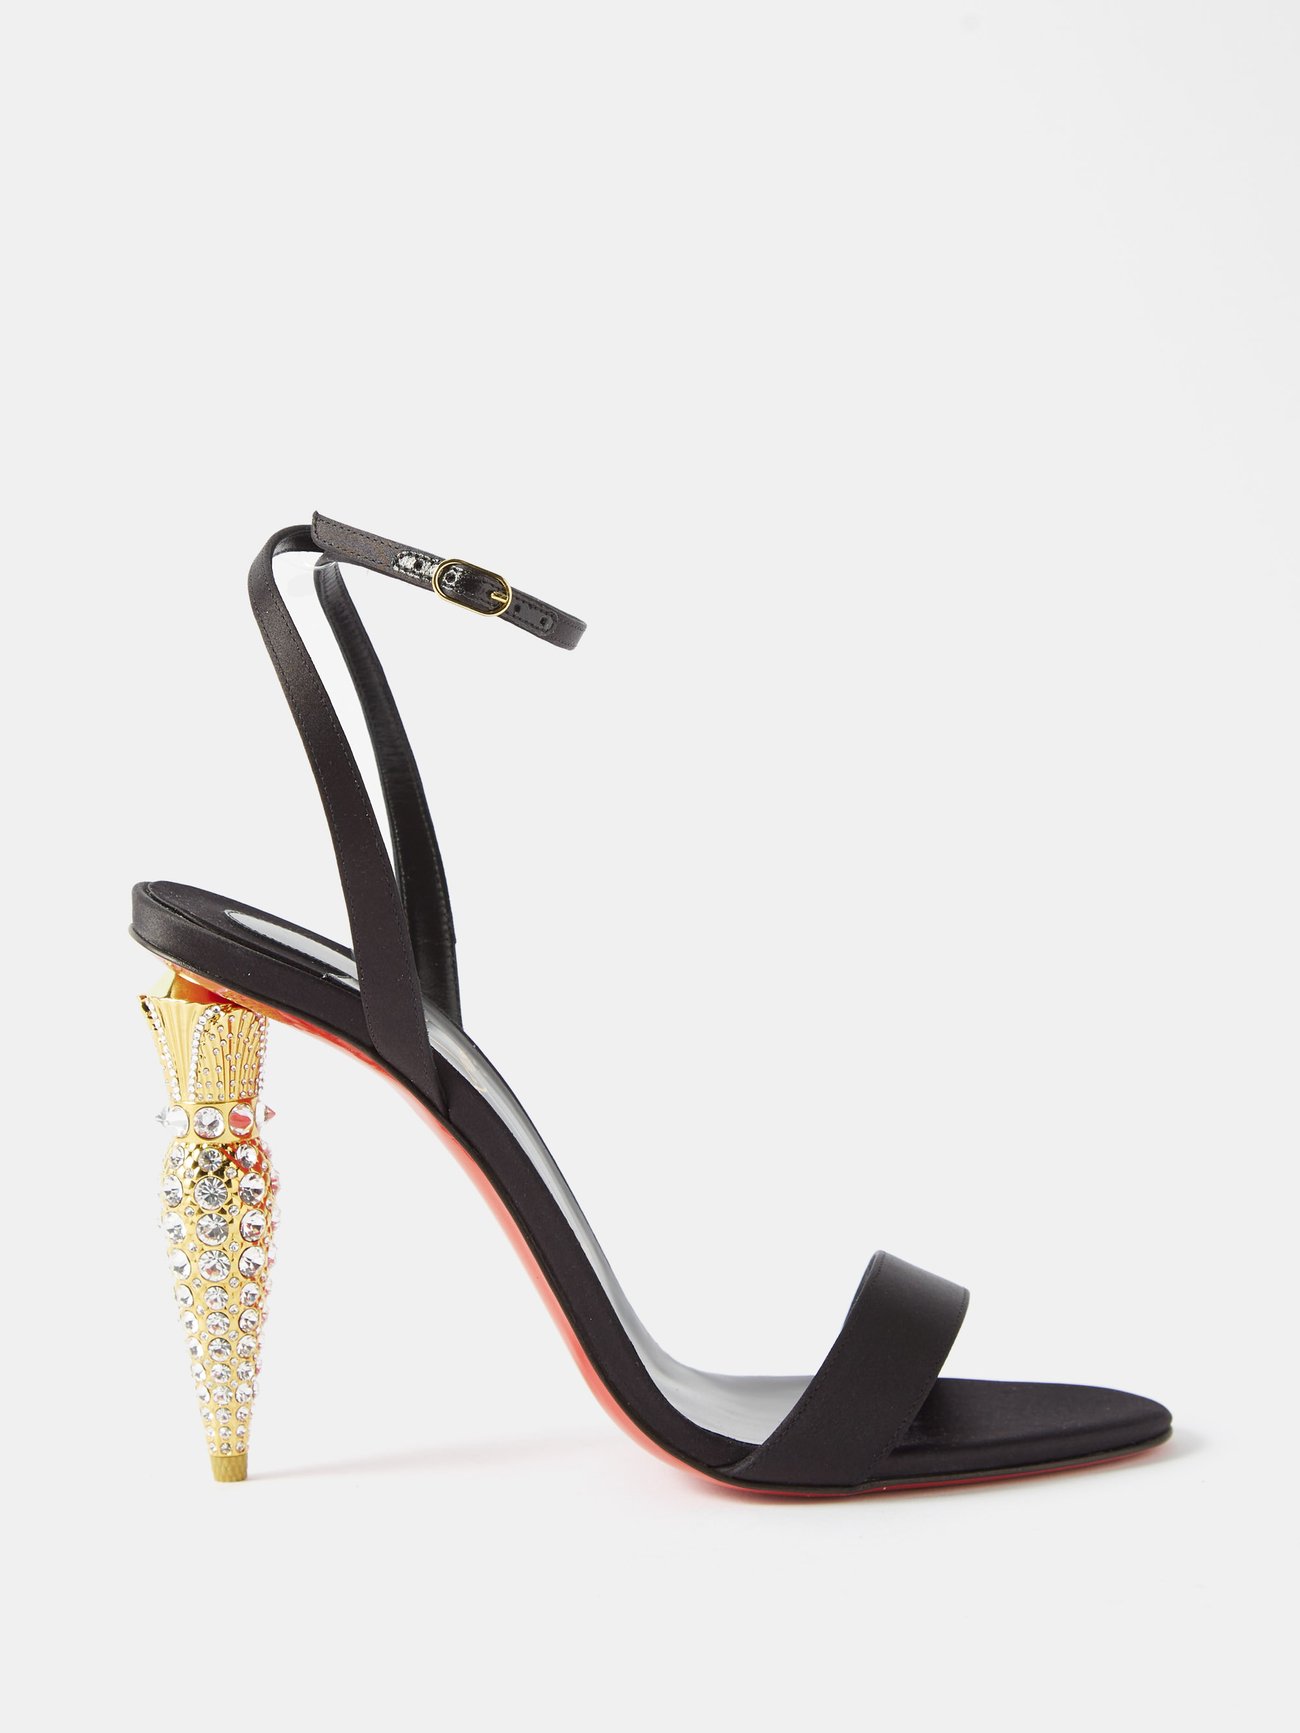 Christian Louboutin Just Queen Crystal Red Sole Mule Sandals